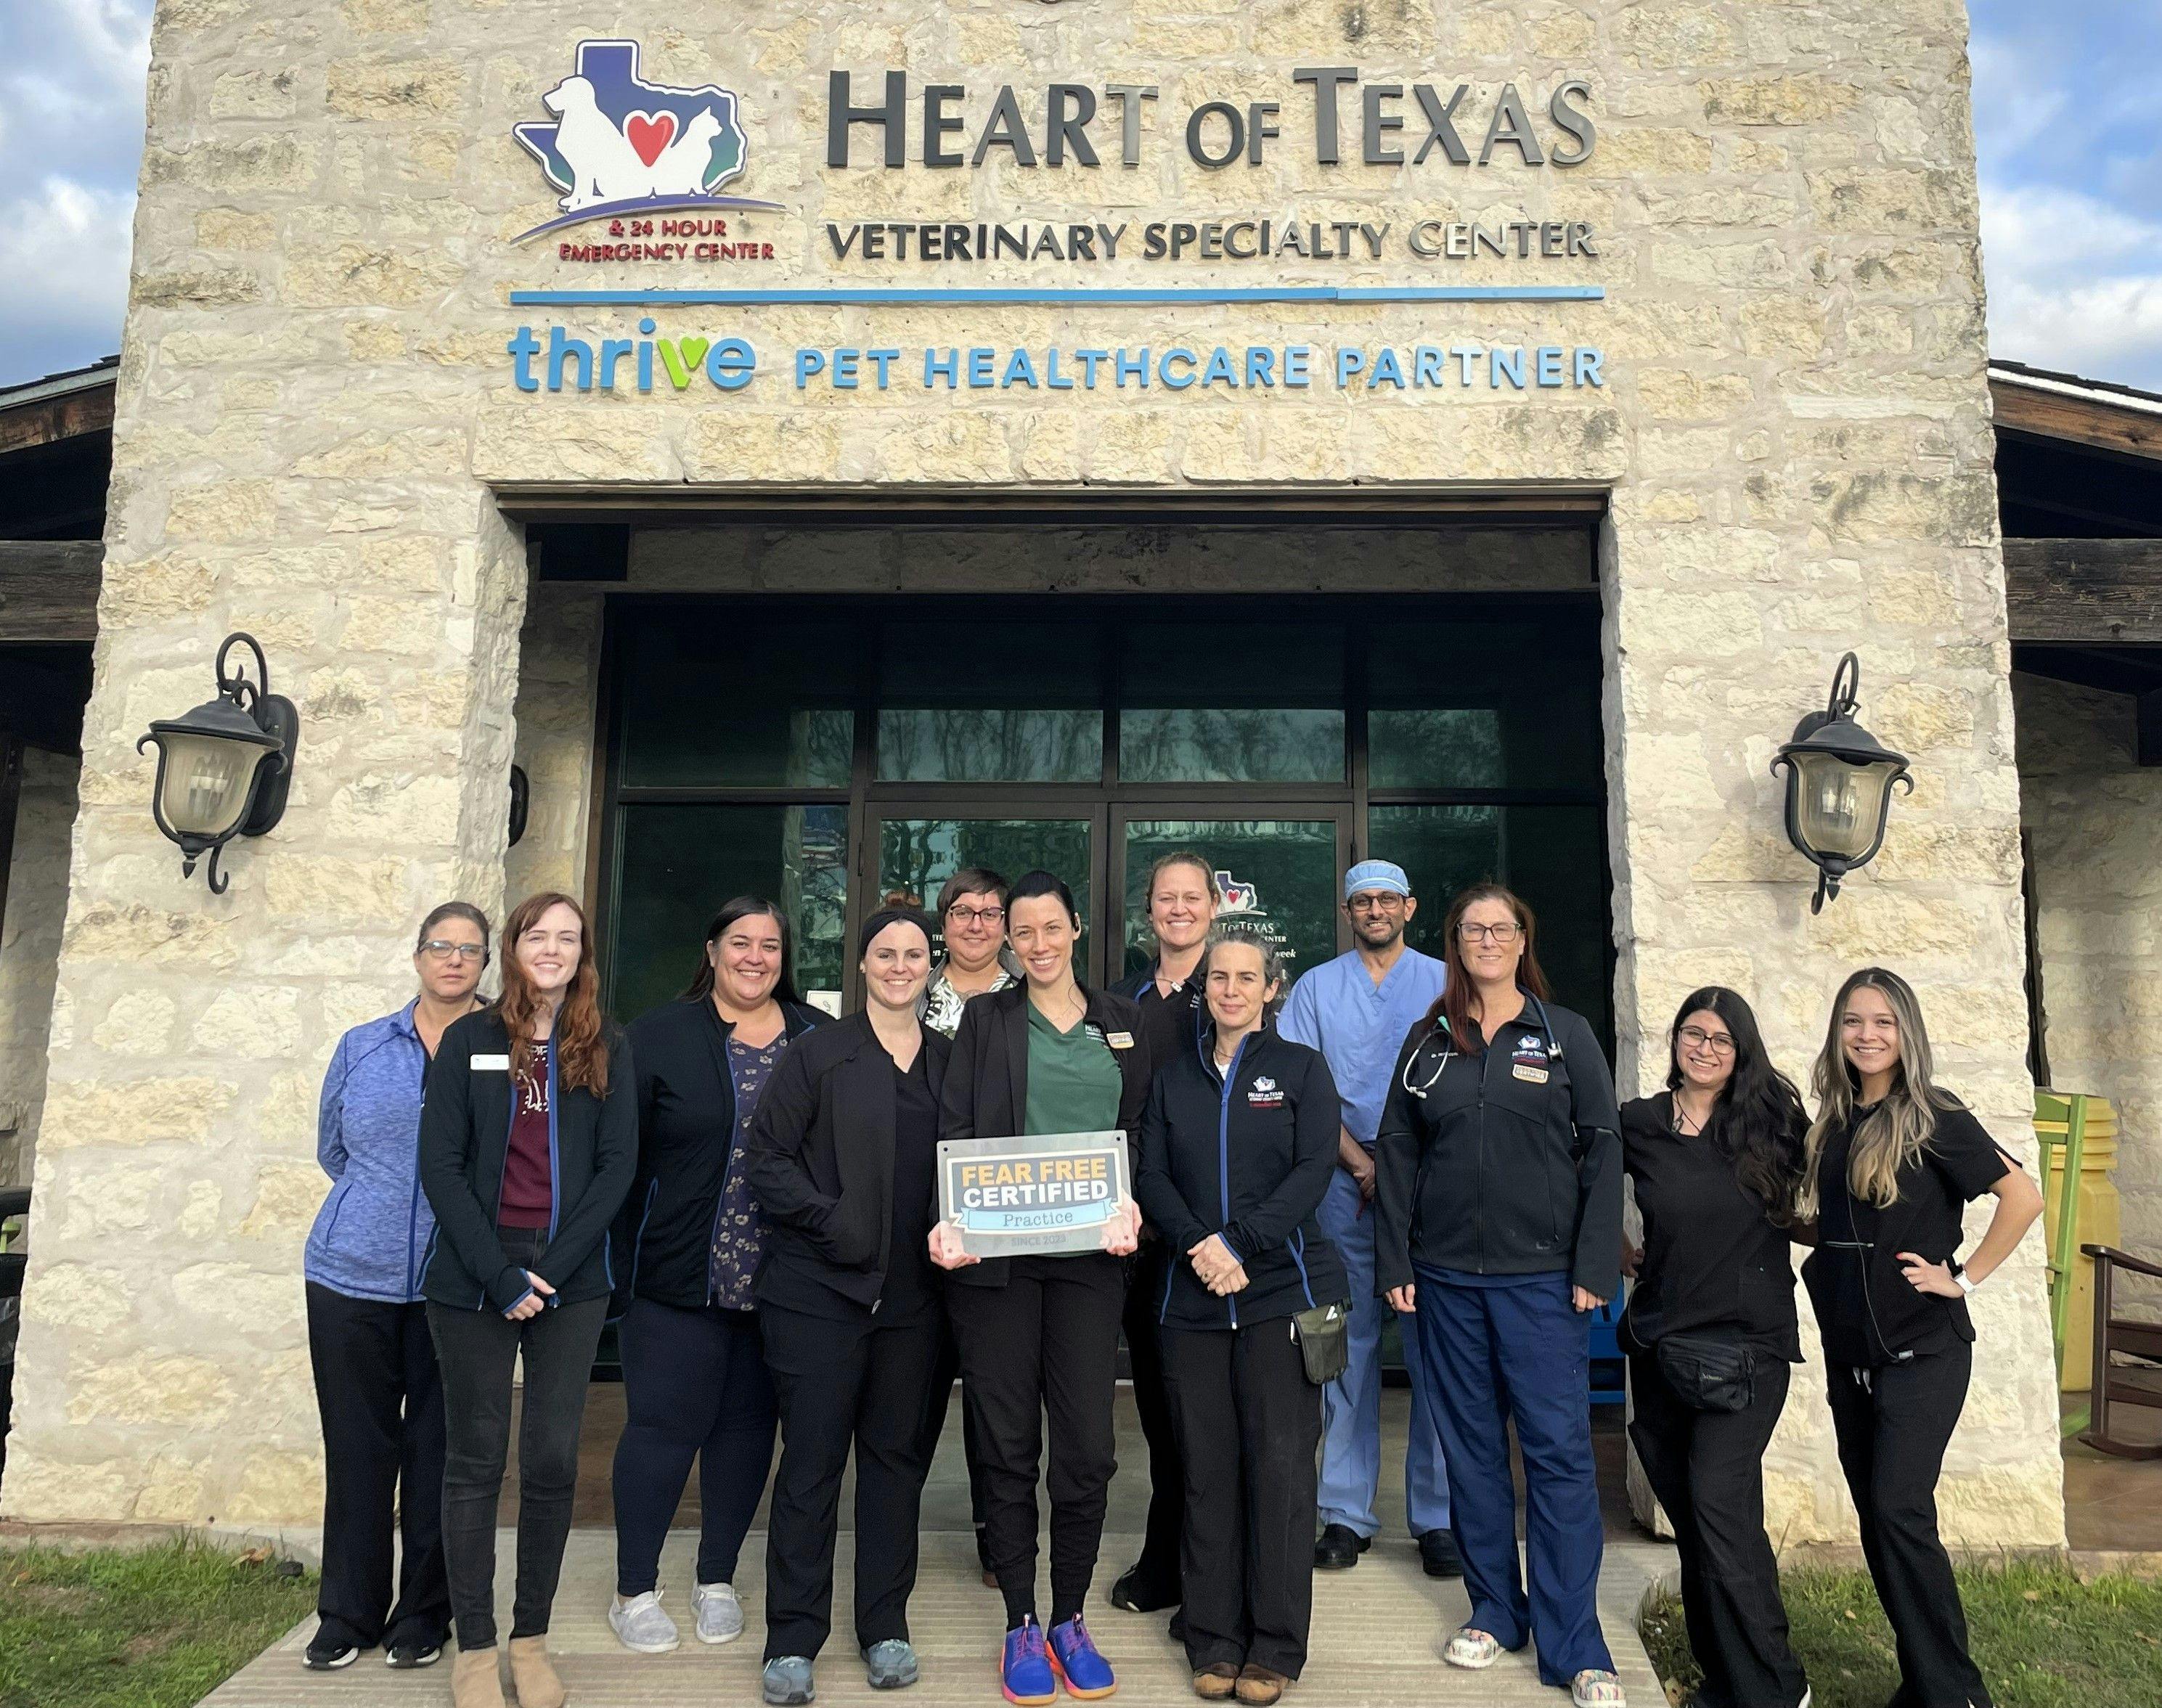 Texas veterinary hospital becomes the first Fear Free certified ER/specialty hospital 